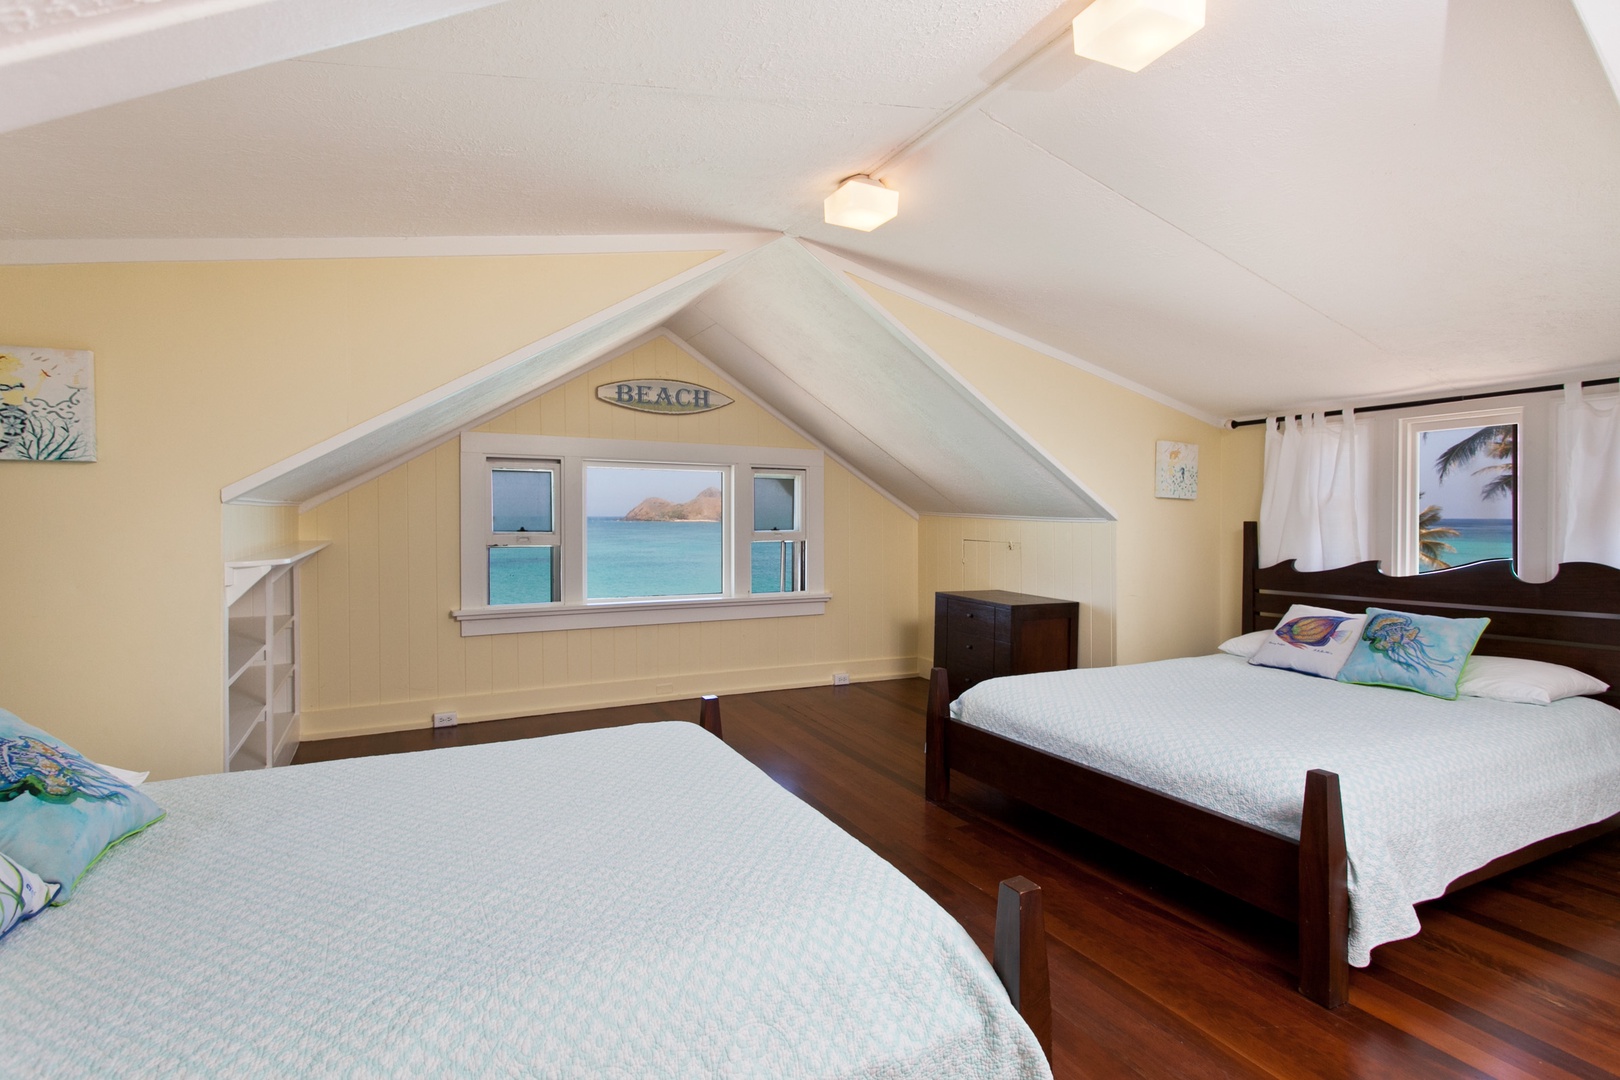 Kailua Vacation Rentals, Lanikai Village* - Hale Mahina Lanikai: Fourth guest bedroom with two queen beds.